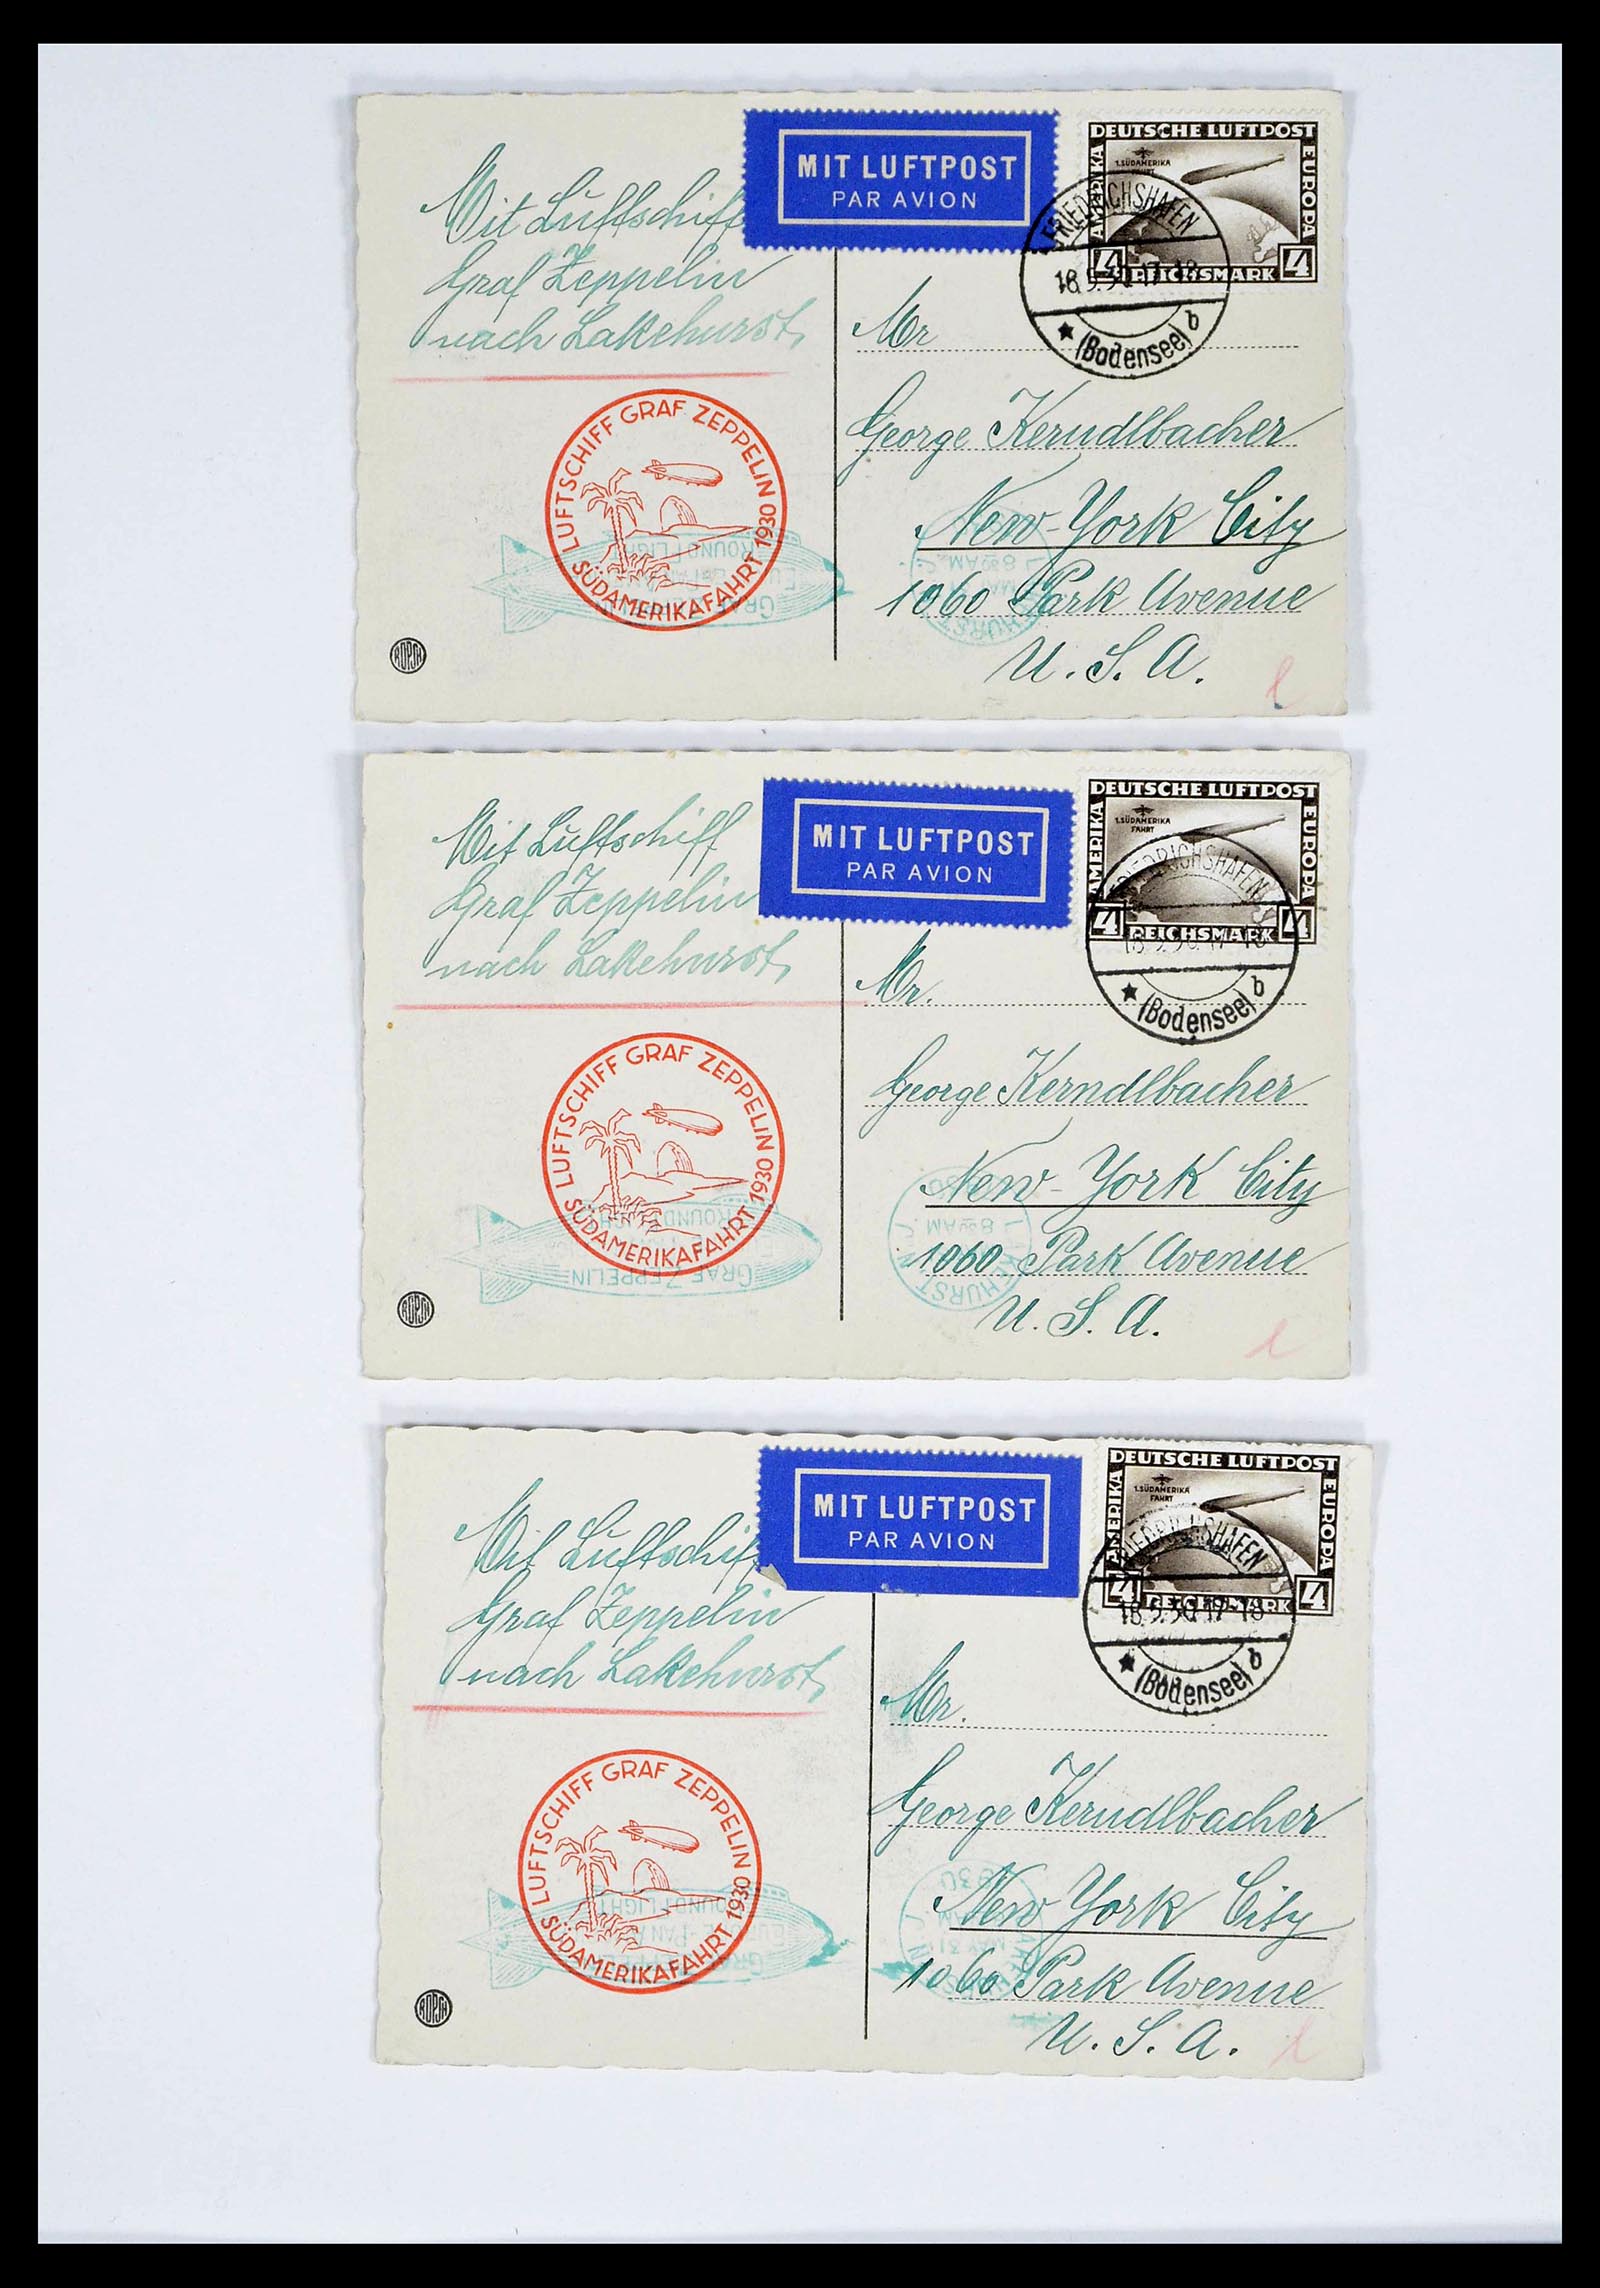 39032 0022 - Stamp collection 39032 Zeppelin covers 1928-1933.